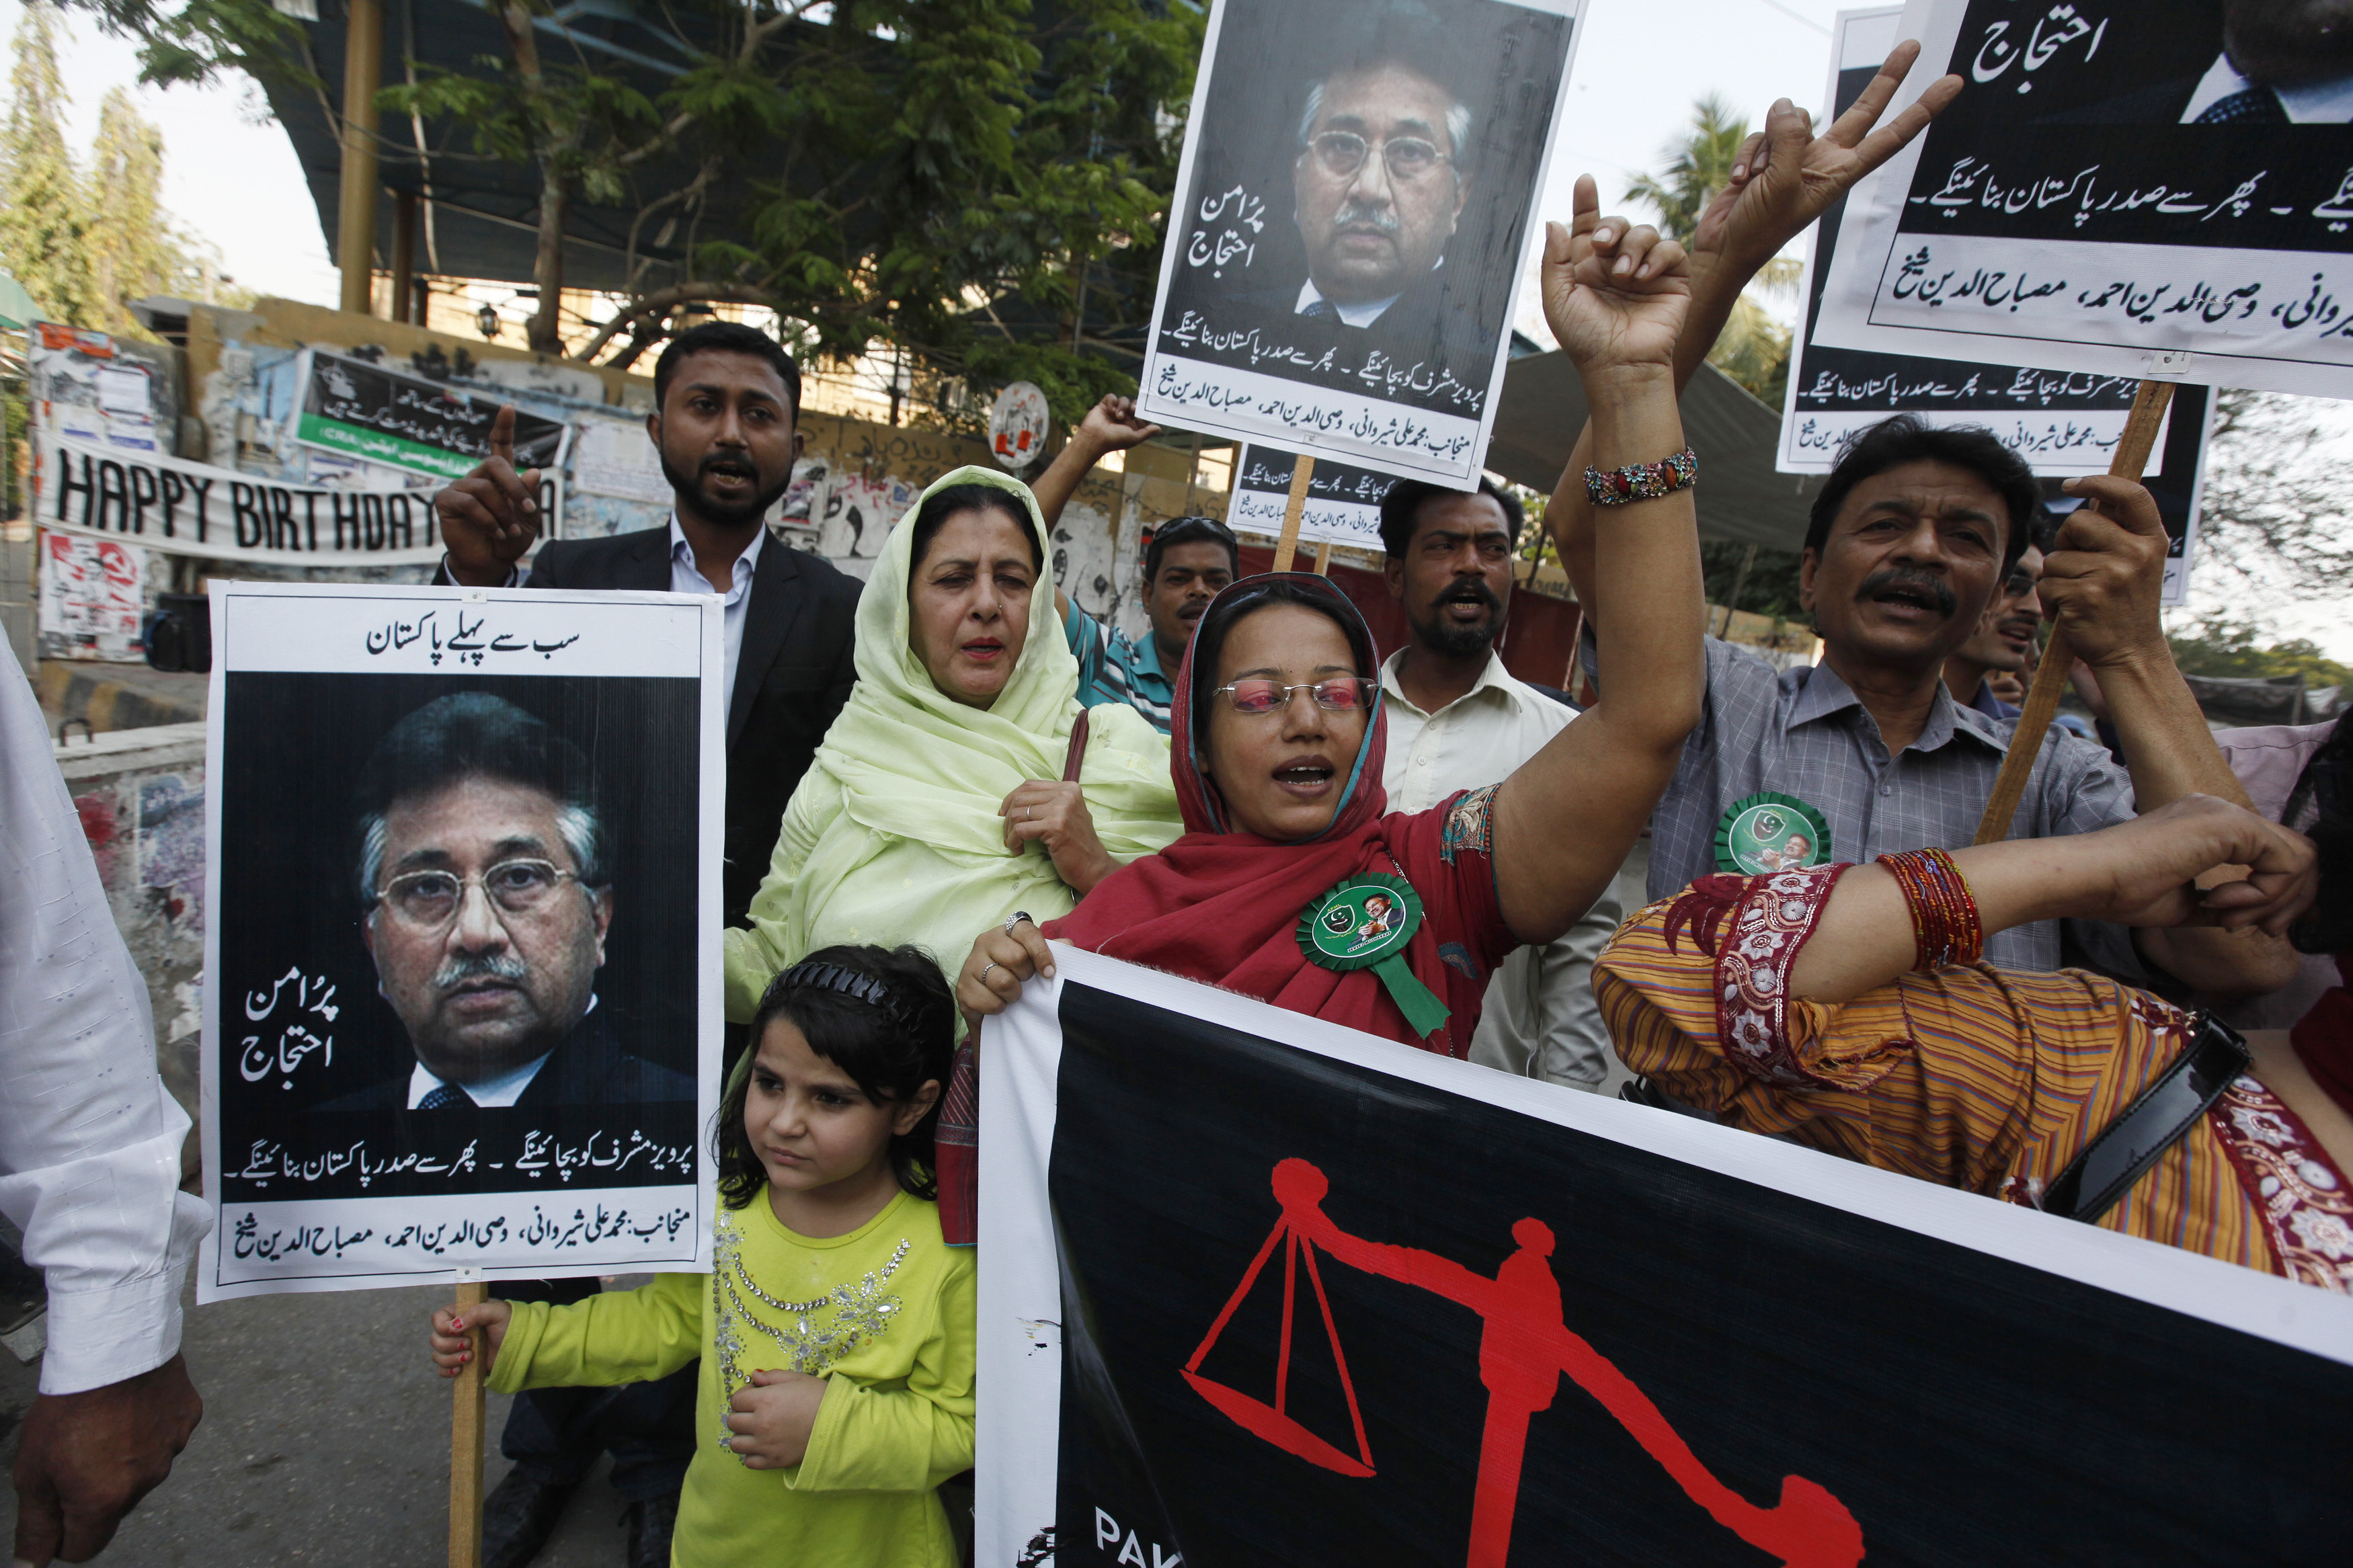 Supporters of former President Pervez Musharraf, head of the All Pakistan Muslim League (APML) political party, chant slogans during a protest demanding a fair trial for him in Karachi March 9, 2014. Musharraf is facing treason charges in a special court in Islamabad. The charges relate to his imposition of a state of emergency in 2007, when he was manoeuvring to extend his rule in the face of growing opposition from the public and the judiciary. REUTERS/Akhtar Soomro  (PAKISTAN - Tags: POLITICS CIVIL UNREST CRIME LAW) - GM1EA391JBG01